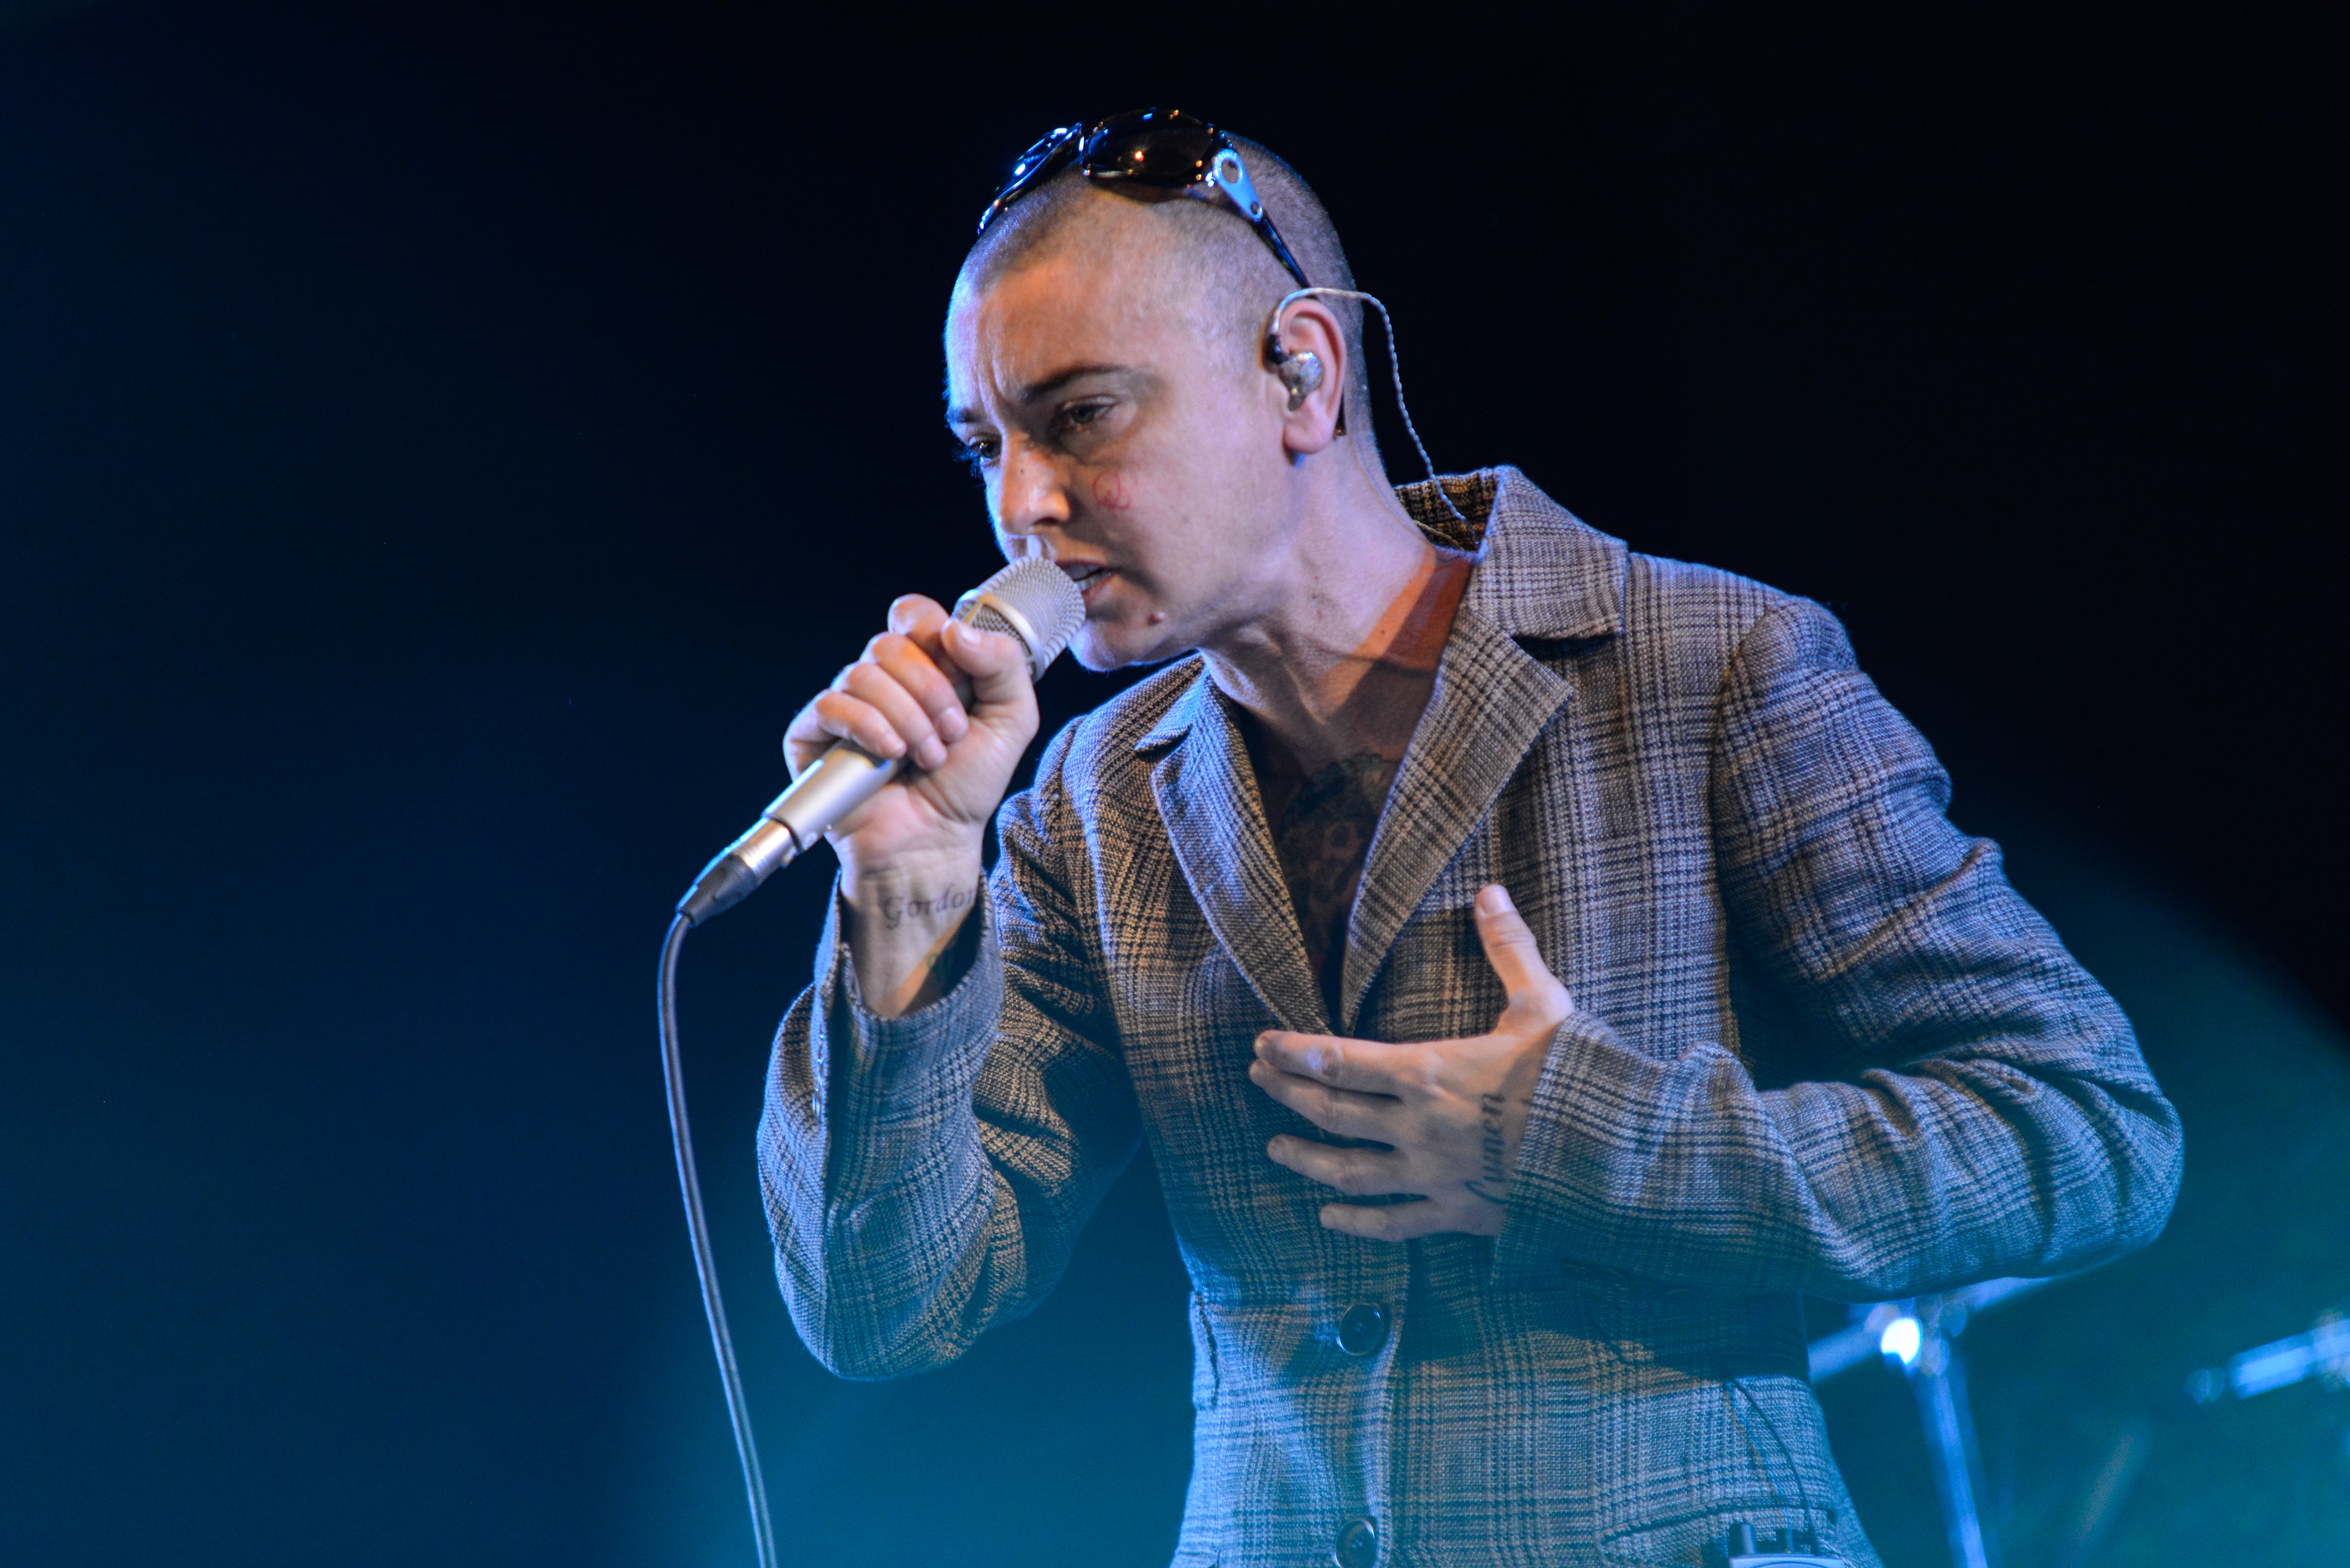 Sinéad O'Connor in Newport, Isle of Wight on September 6, 2013 | Source: Getty Images